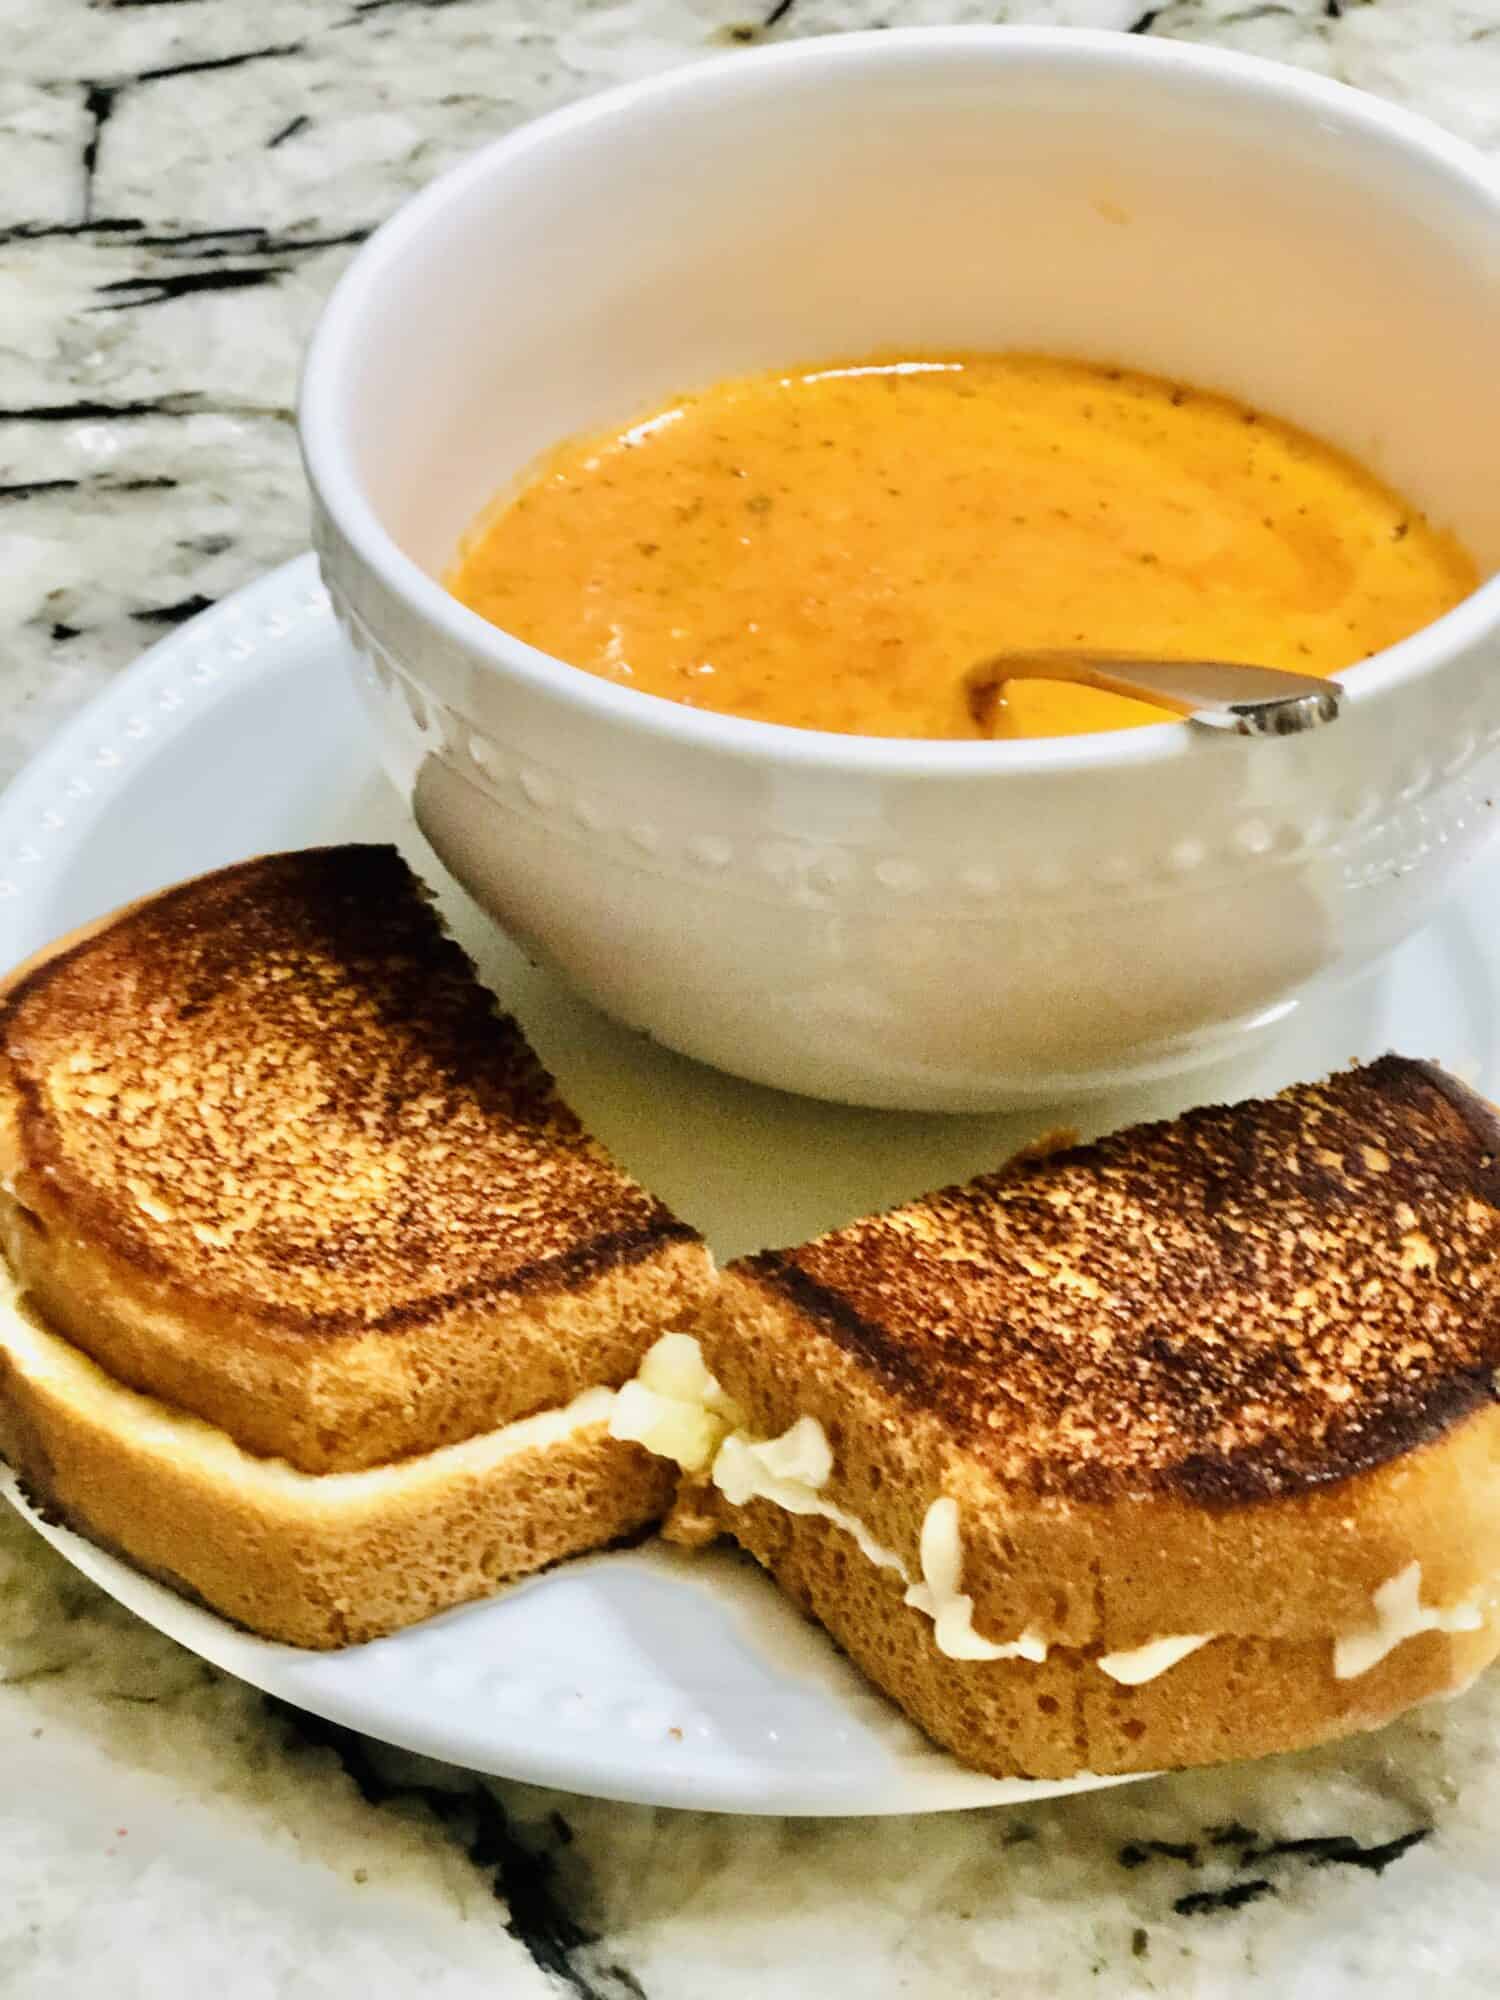 Spicy Creamy Tomato Soup in a bowl with a side of grilled cheese